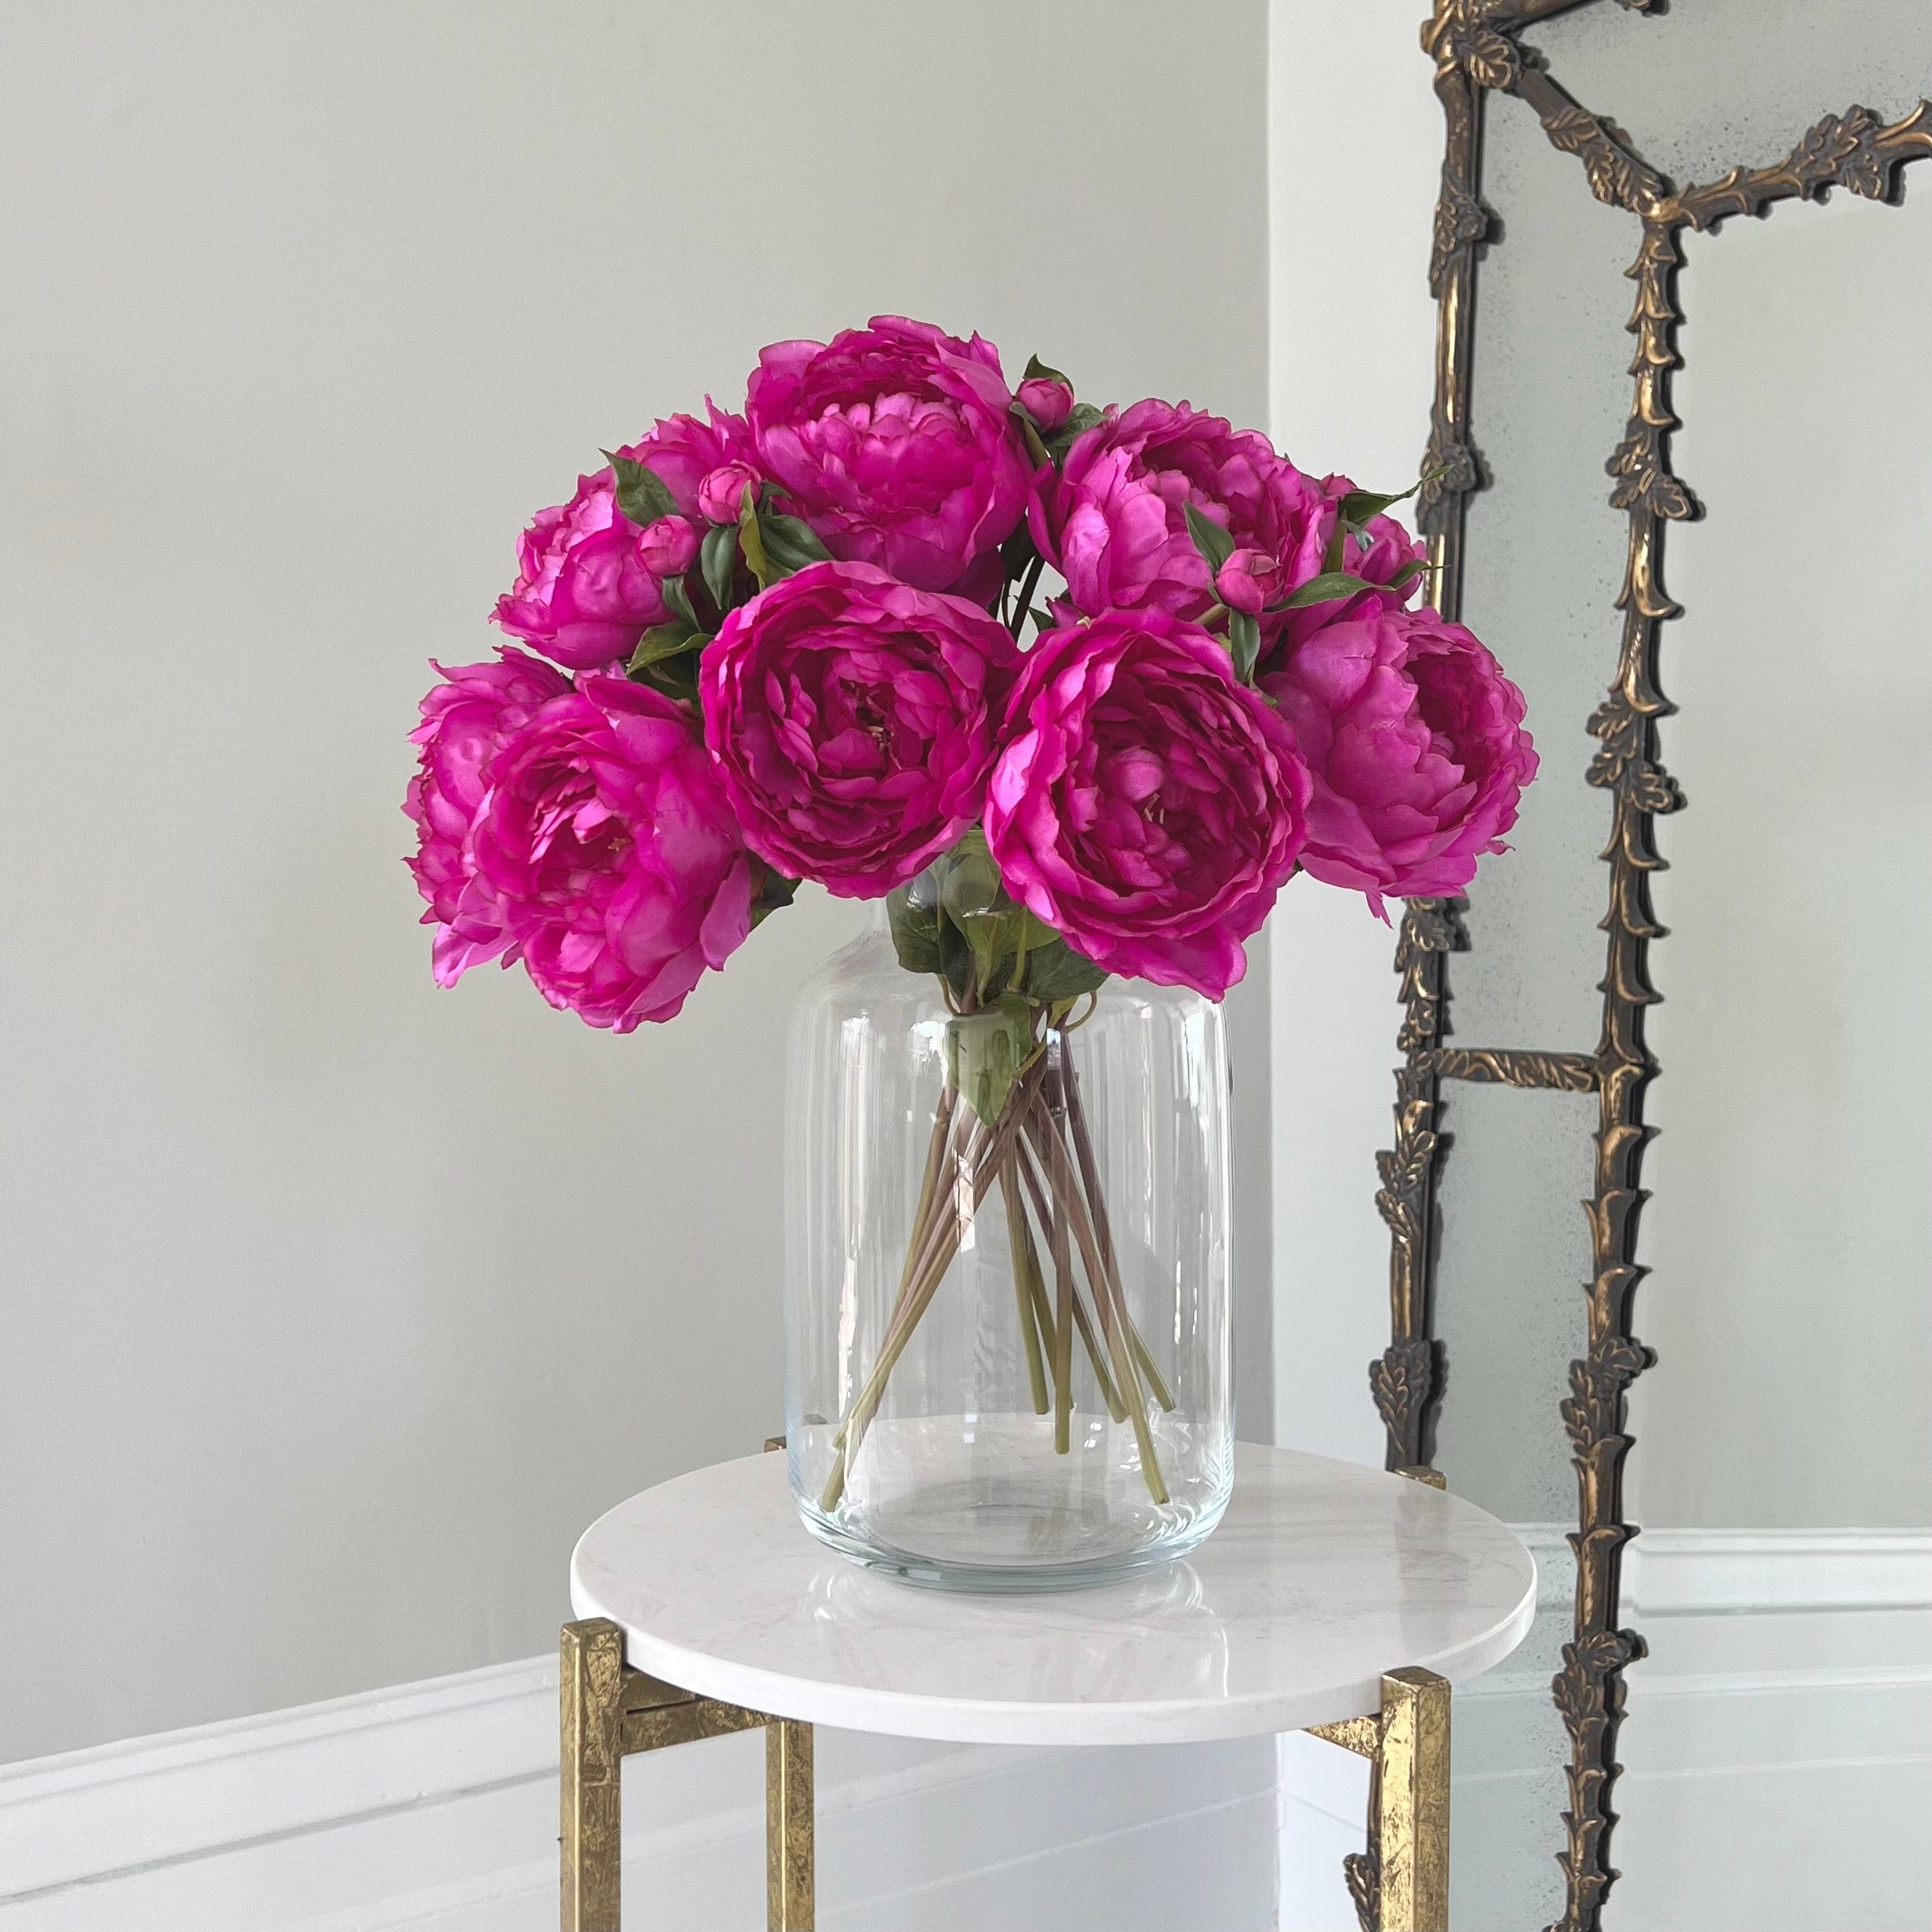 Luxury Lifelike Realistic Artificial Fabric Silk Blooms with Foliage Buy Online from The Faux Flower Company | 12 stems of Fuchsia Classic Peony ABY6043FU styled in Clear Glass Large Funnel Neck Vase ABV2253